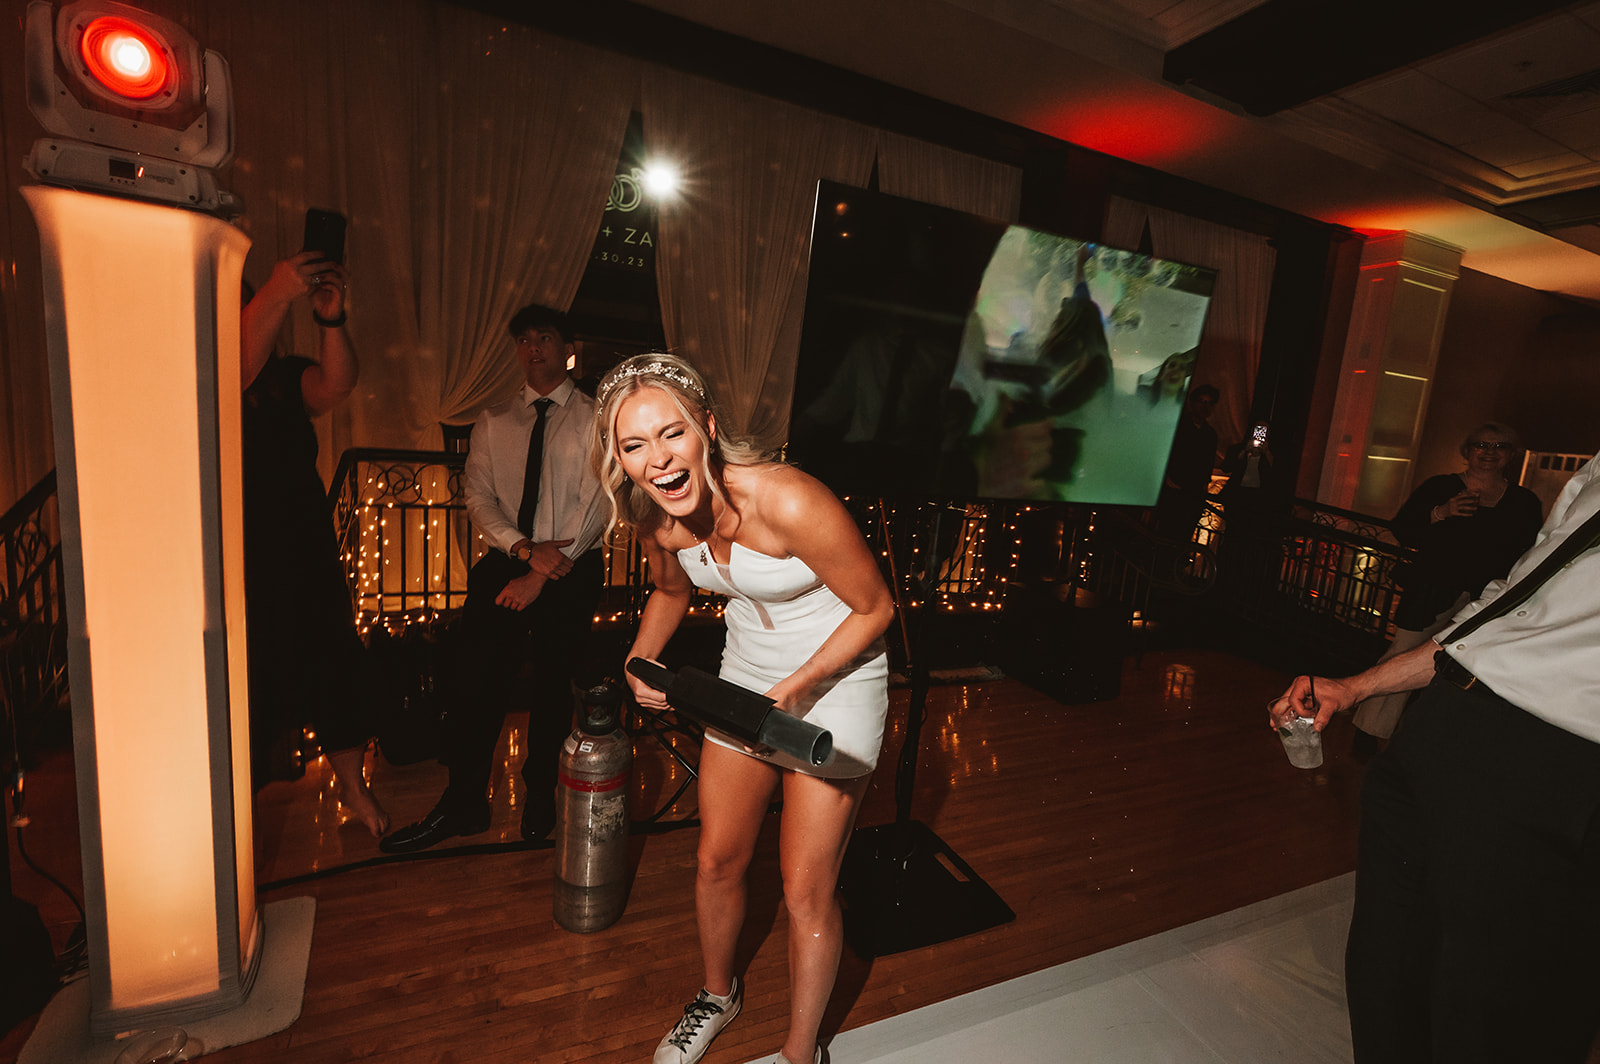 Chevy Chase Country Club Wedding Photo - Epic Dance Party CO2 Cannon